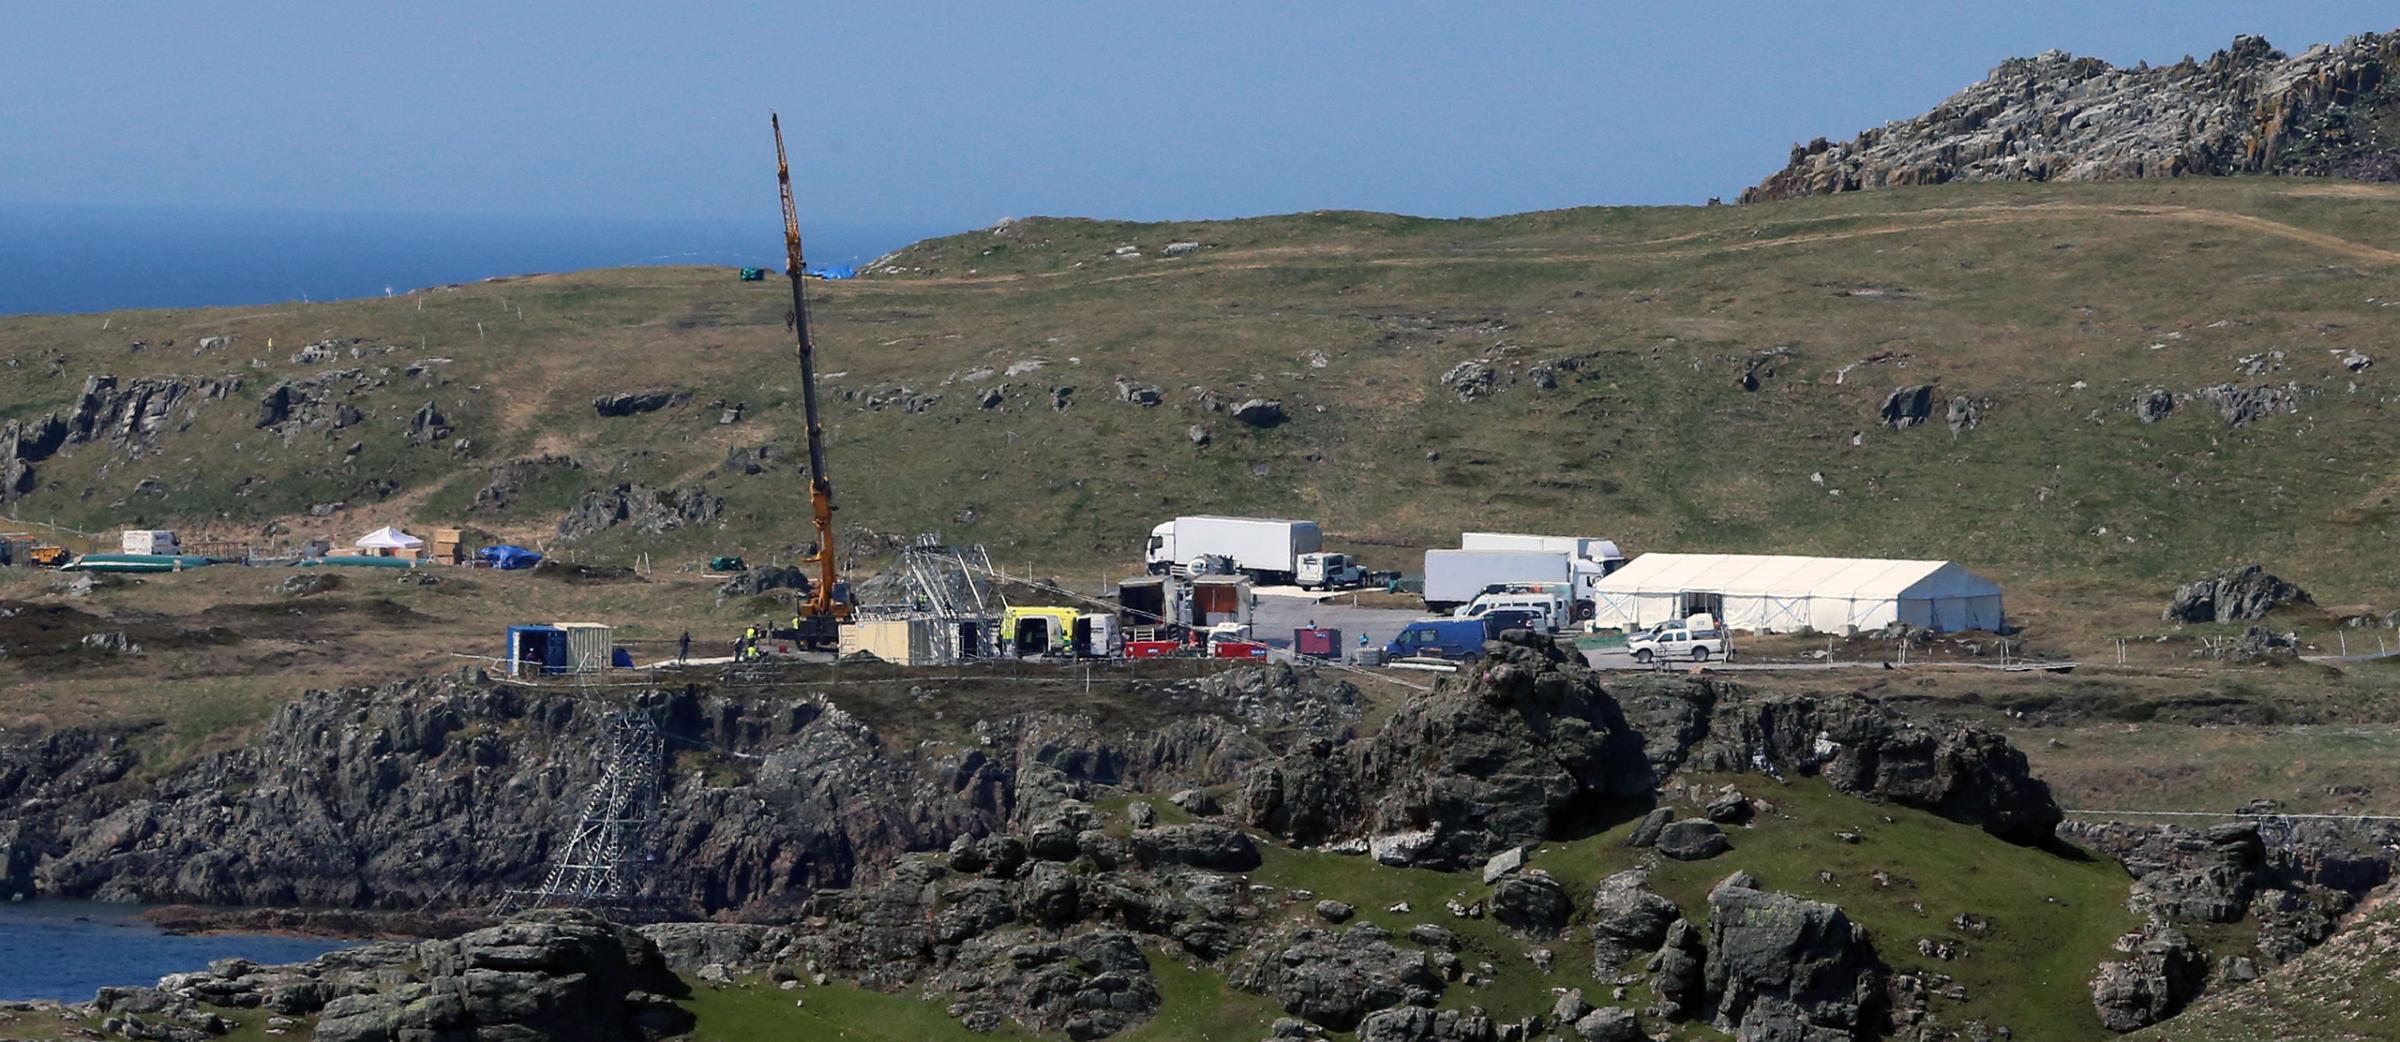 A set is created in Malin Head, Co Donegal Ireland, as filming for the next Star Wars movie will take place there, May 12, 2016.